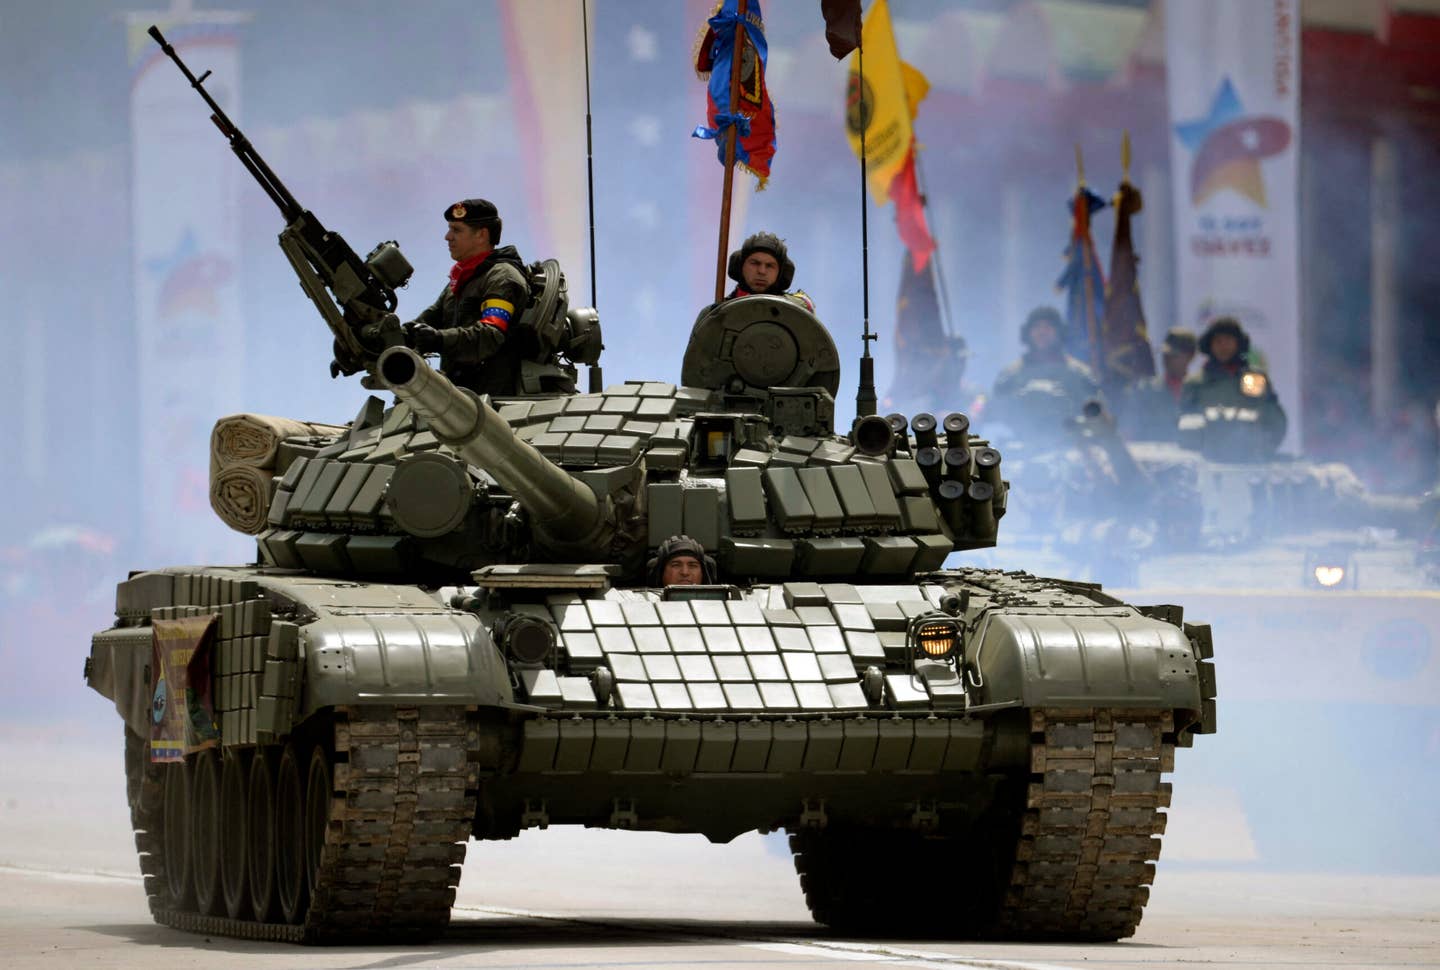 Venezuelan Army soldiers in a Russian-made T-72 tank during a military ceremony to commemorate the first anniversary of the death of President Hugo Chavez, in Caracas on March 5, 2014. <em>Photo by JUAN BARRETO/AFP via Getty Images</em>